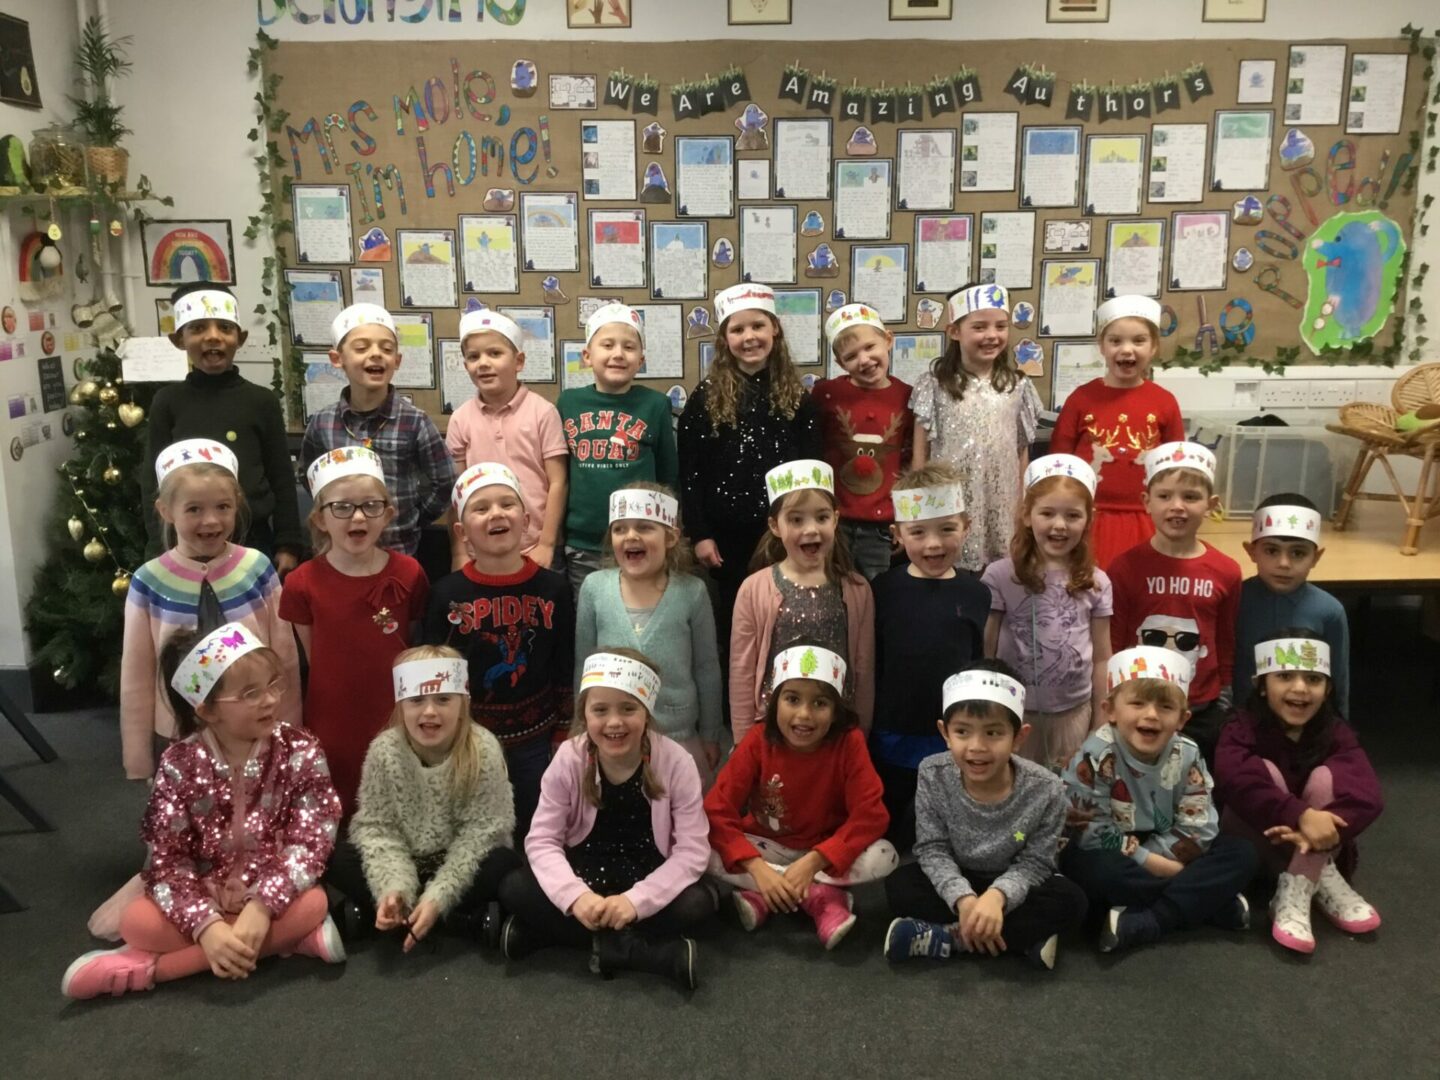 Year 1 had a blast at their Christmas party